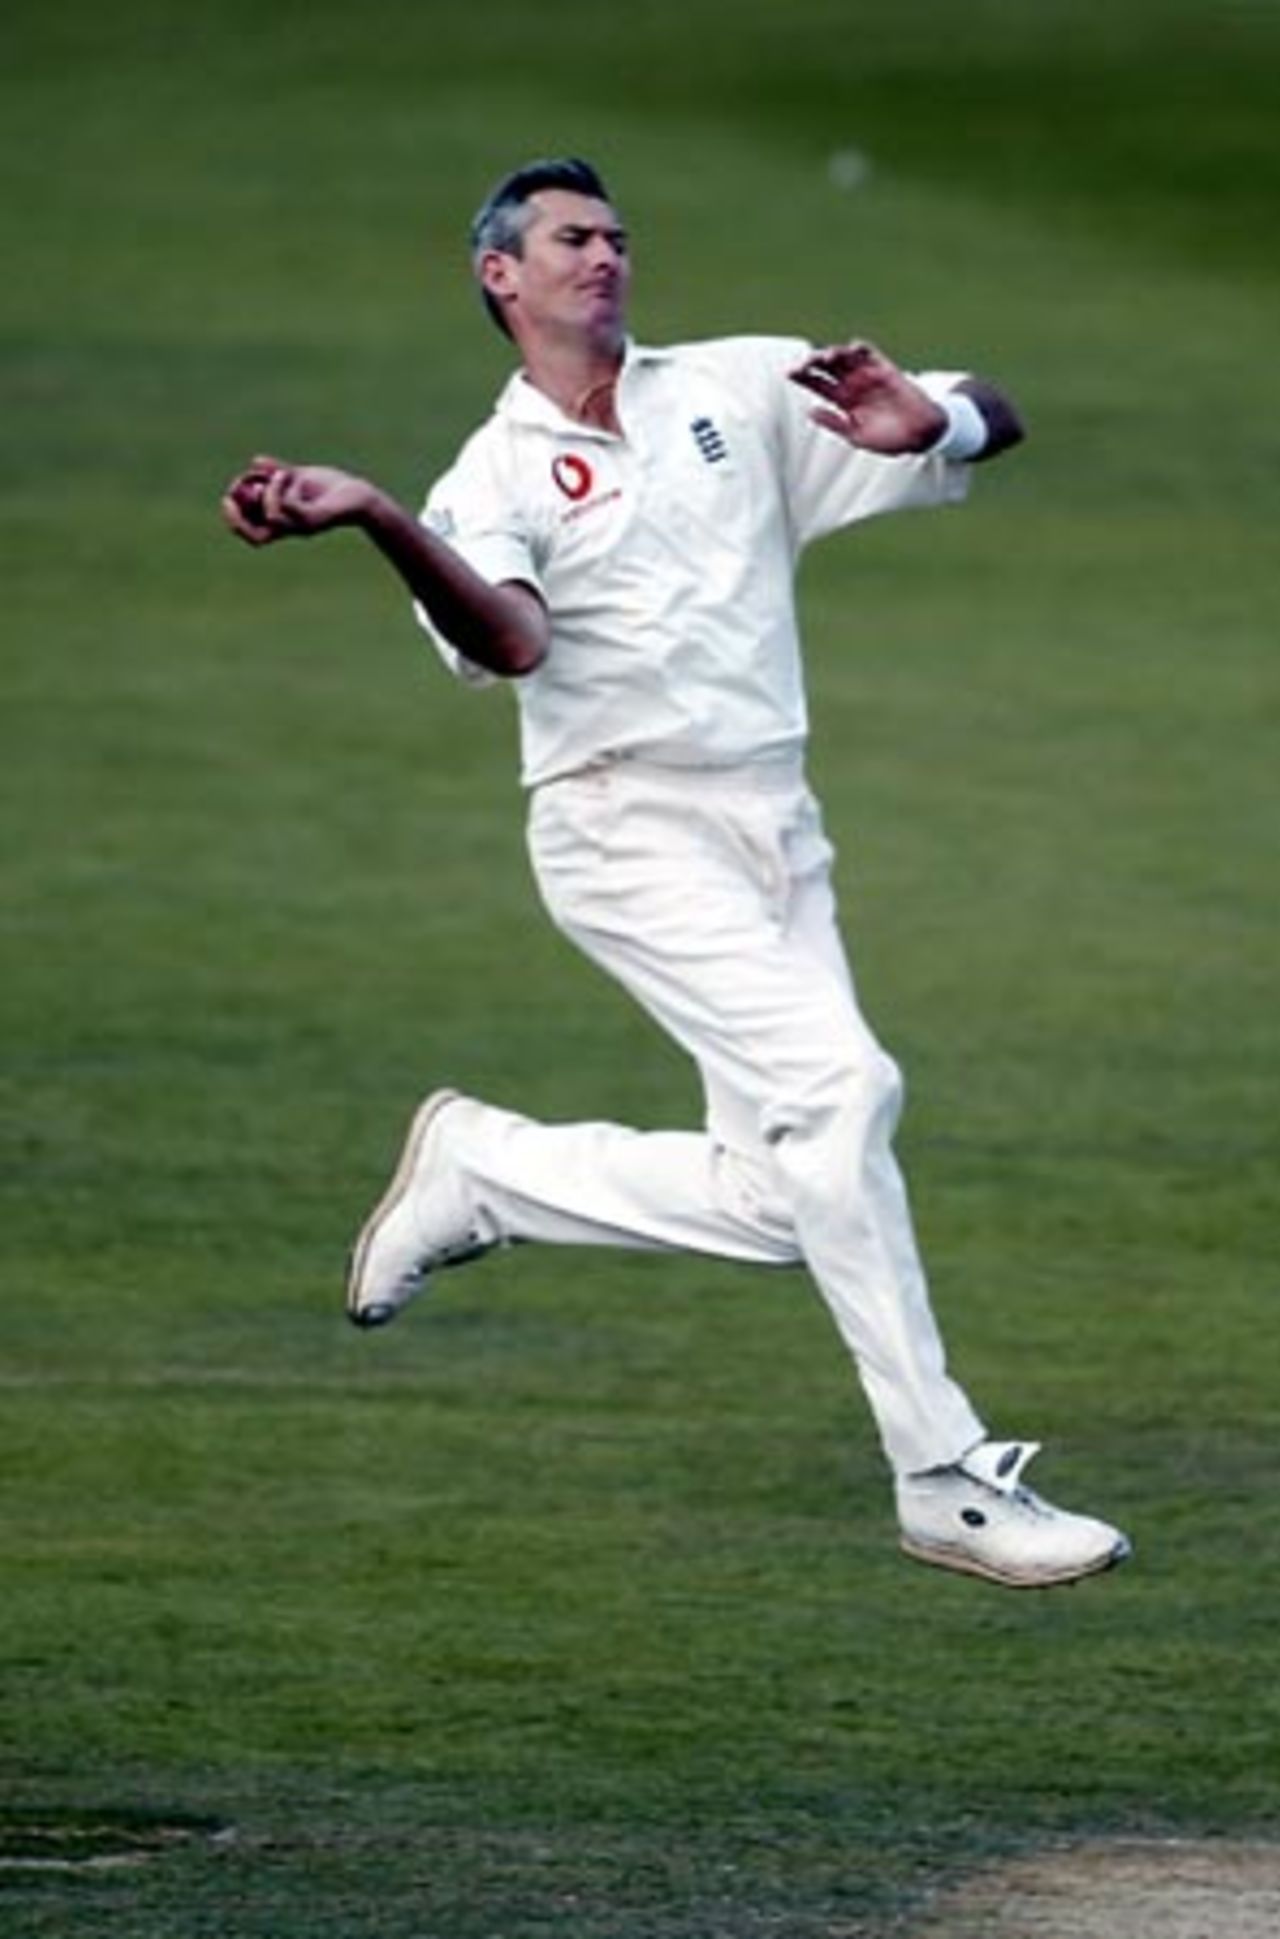 England bowler Andy Caddick delivers a ball during his second innings spell of 6-122 from 25 overs. 1st Test: New Zealand v England at Jade Stadium, Christchurch, 13-17 March 2002 (16 March 2002).